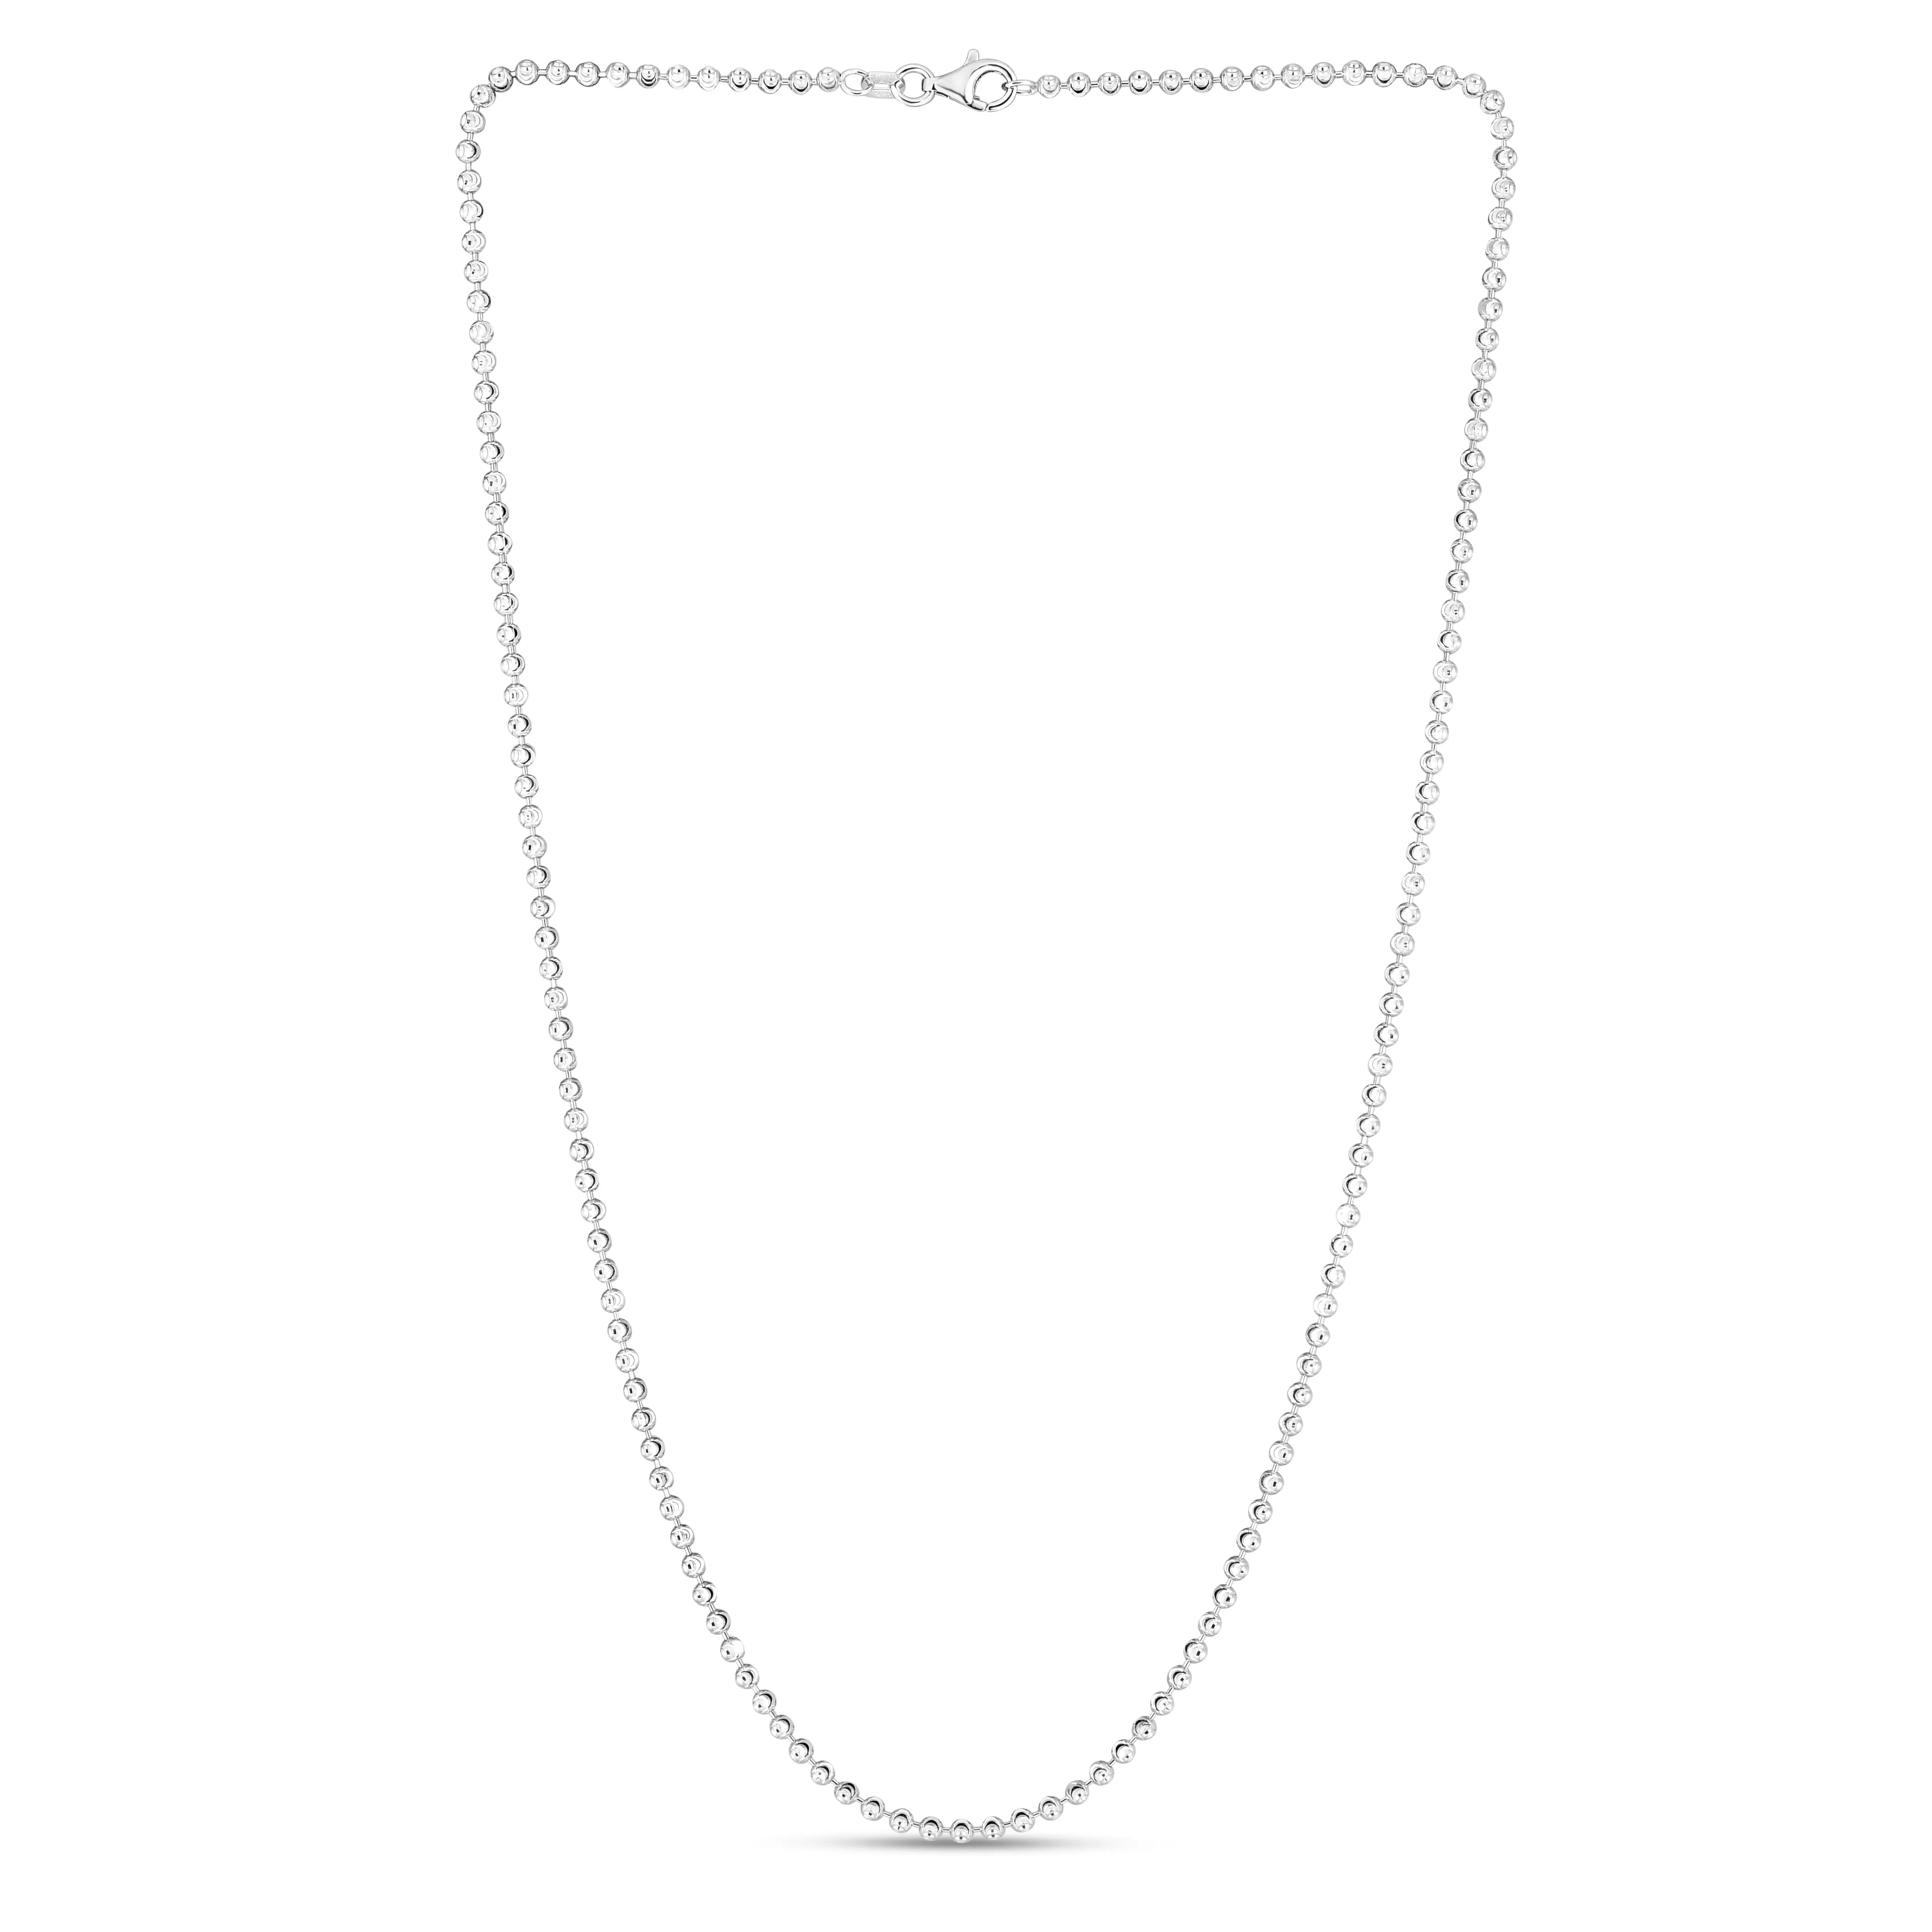 Sterling Silver 2.5mm Moon-cut Bead Chain